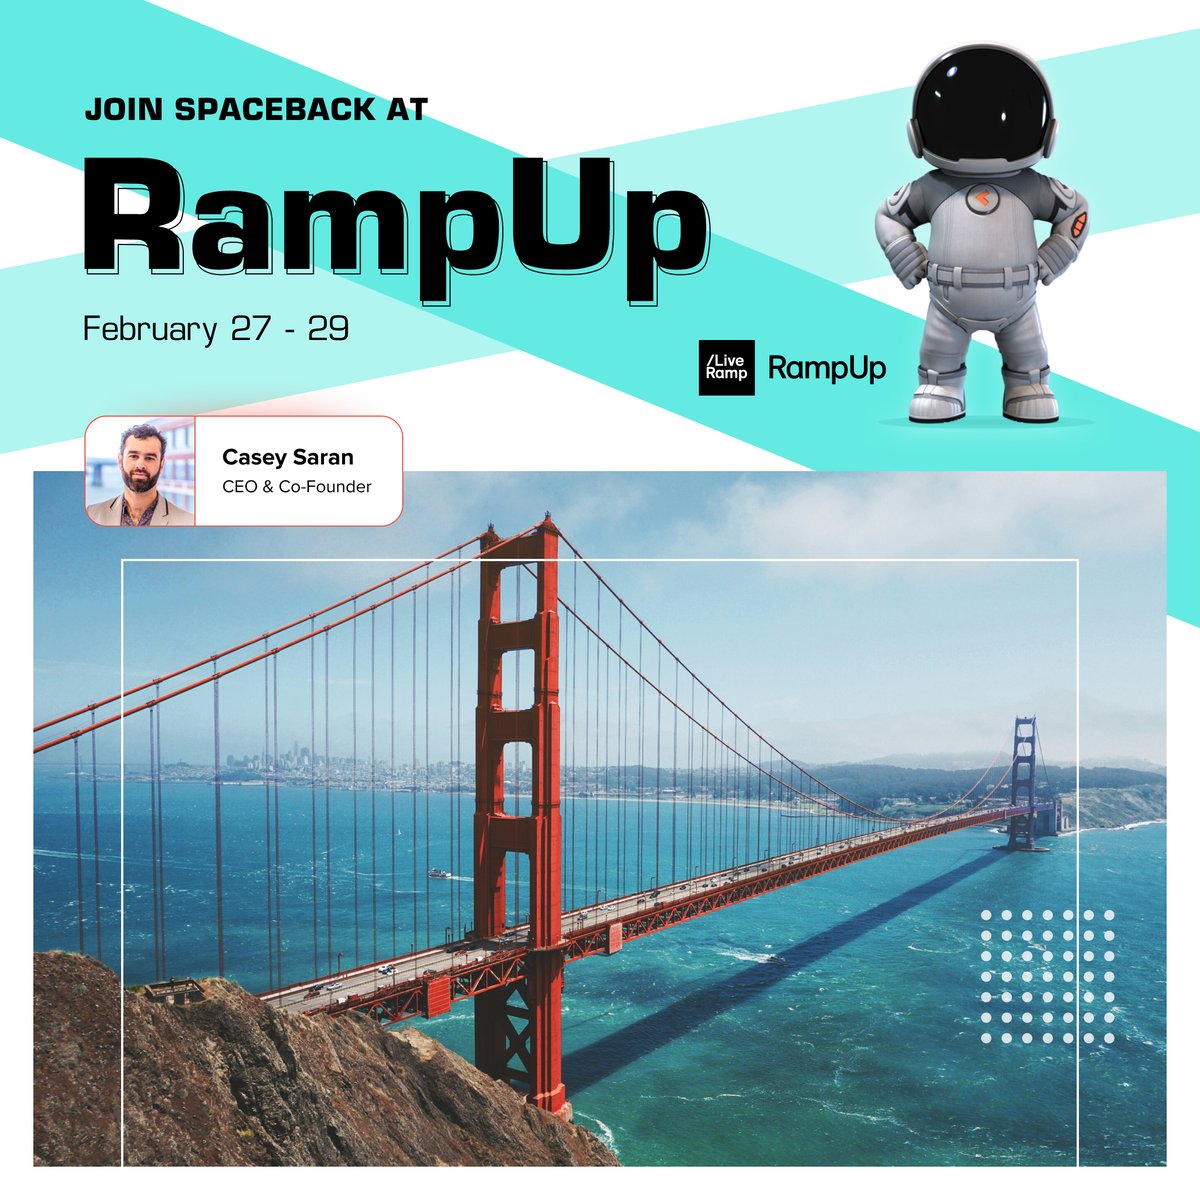 We’re 2 weeks away from the premier data collaboration event, @LiveRamp's #RampUp! Casey Saran is gearing up to join the action in San Francisco. Reach out to Casey if you'll be there! Let’s connect & dive into the future of advertising amidst #cookiedeprecation. See you there!